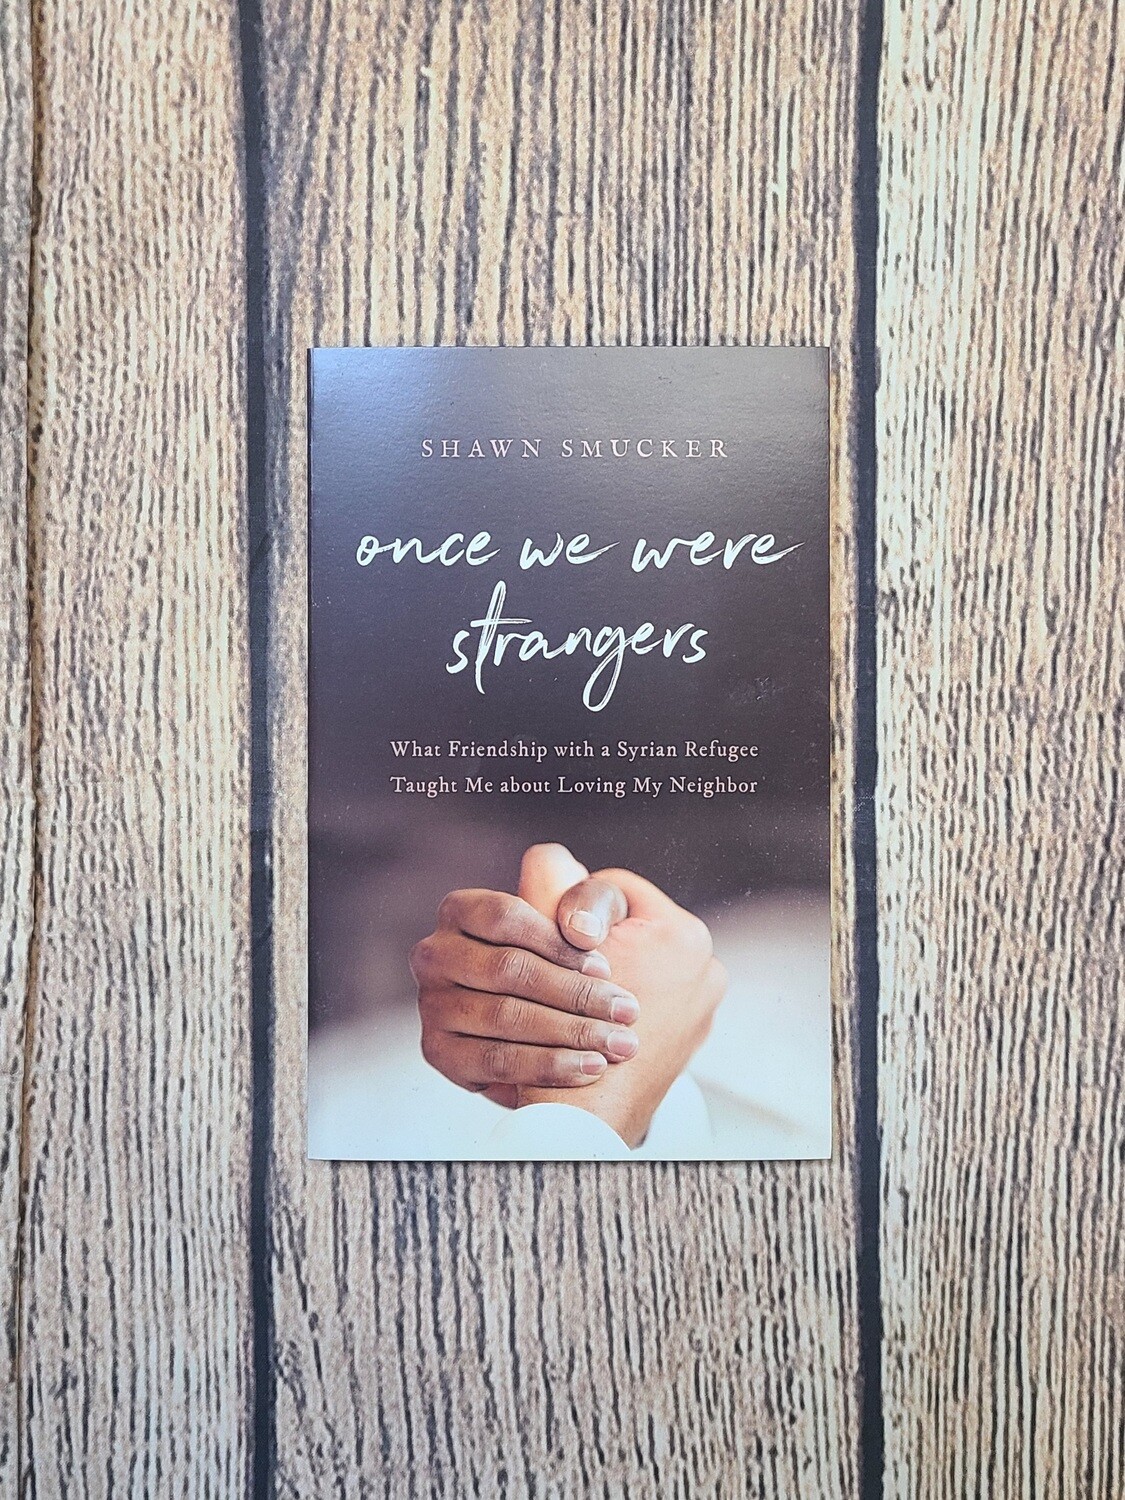 Once We Were Strangers: What Frienship with a Syrian Refugee Taught Me about Loving My Neighbor by Shawn Smucker